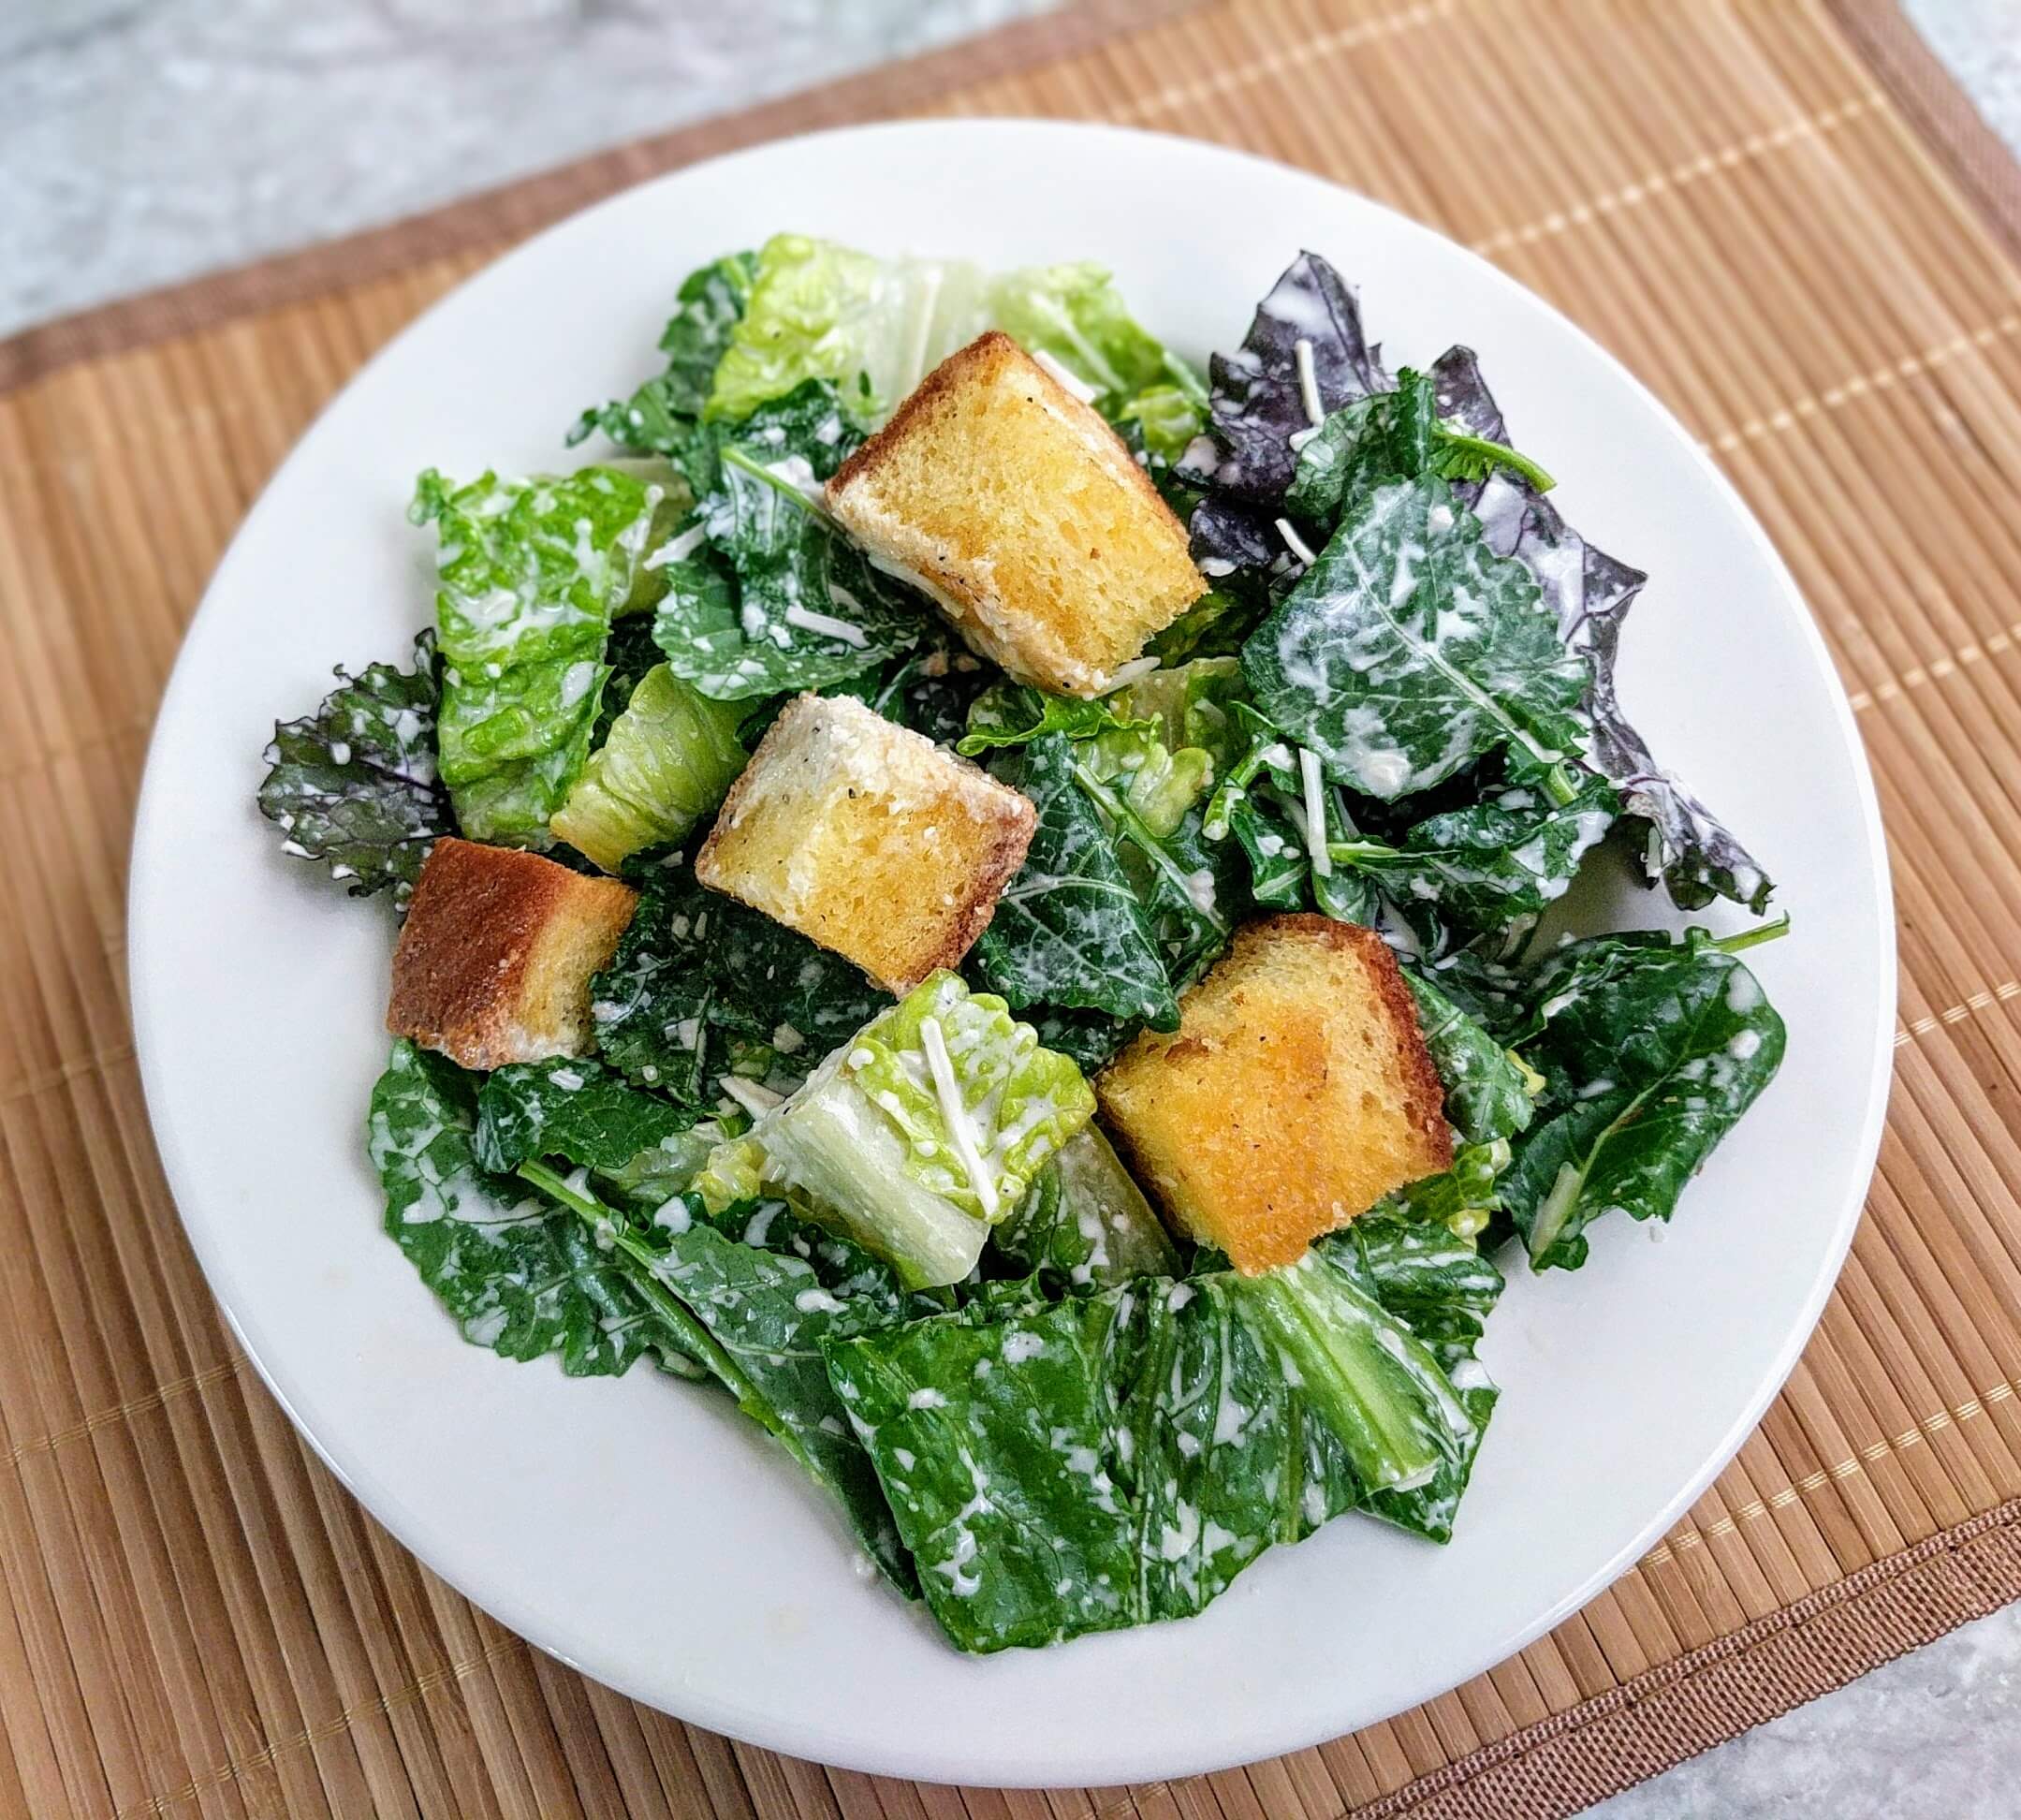 Eggless Caesar Salad Recipe Step By Step Instructions